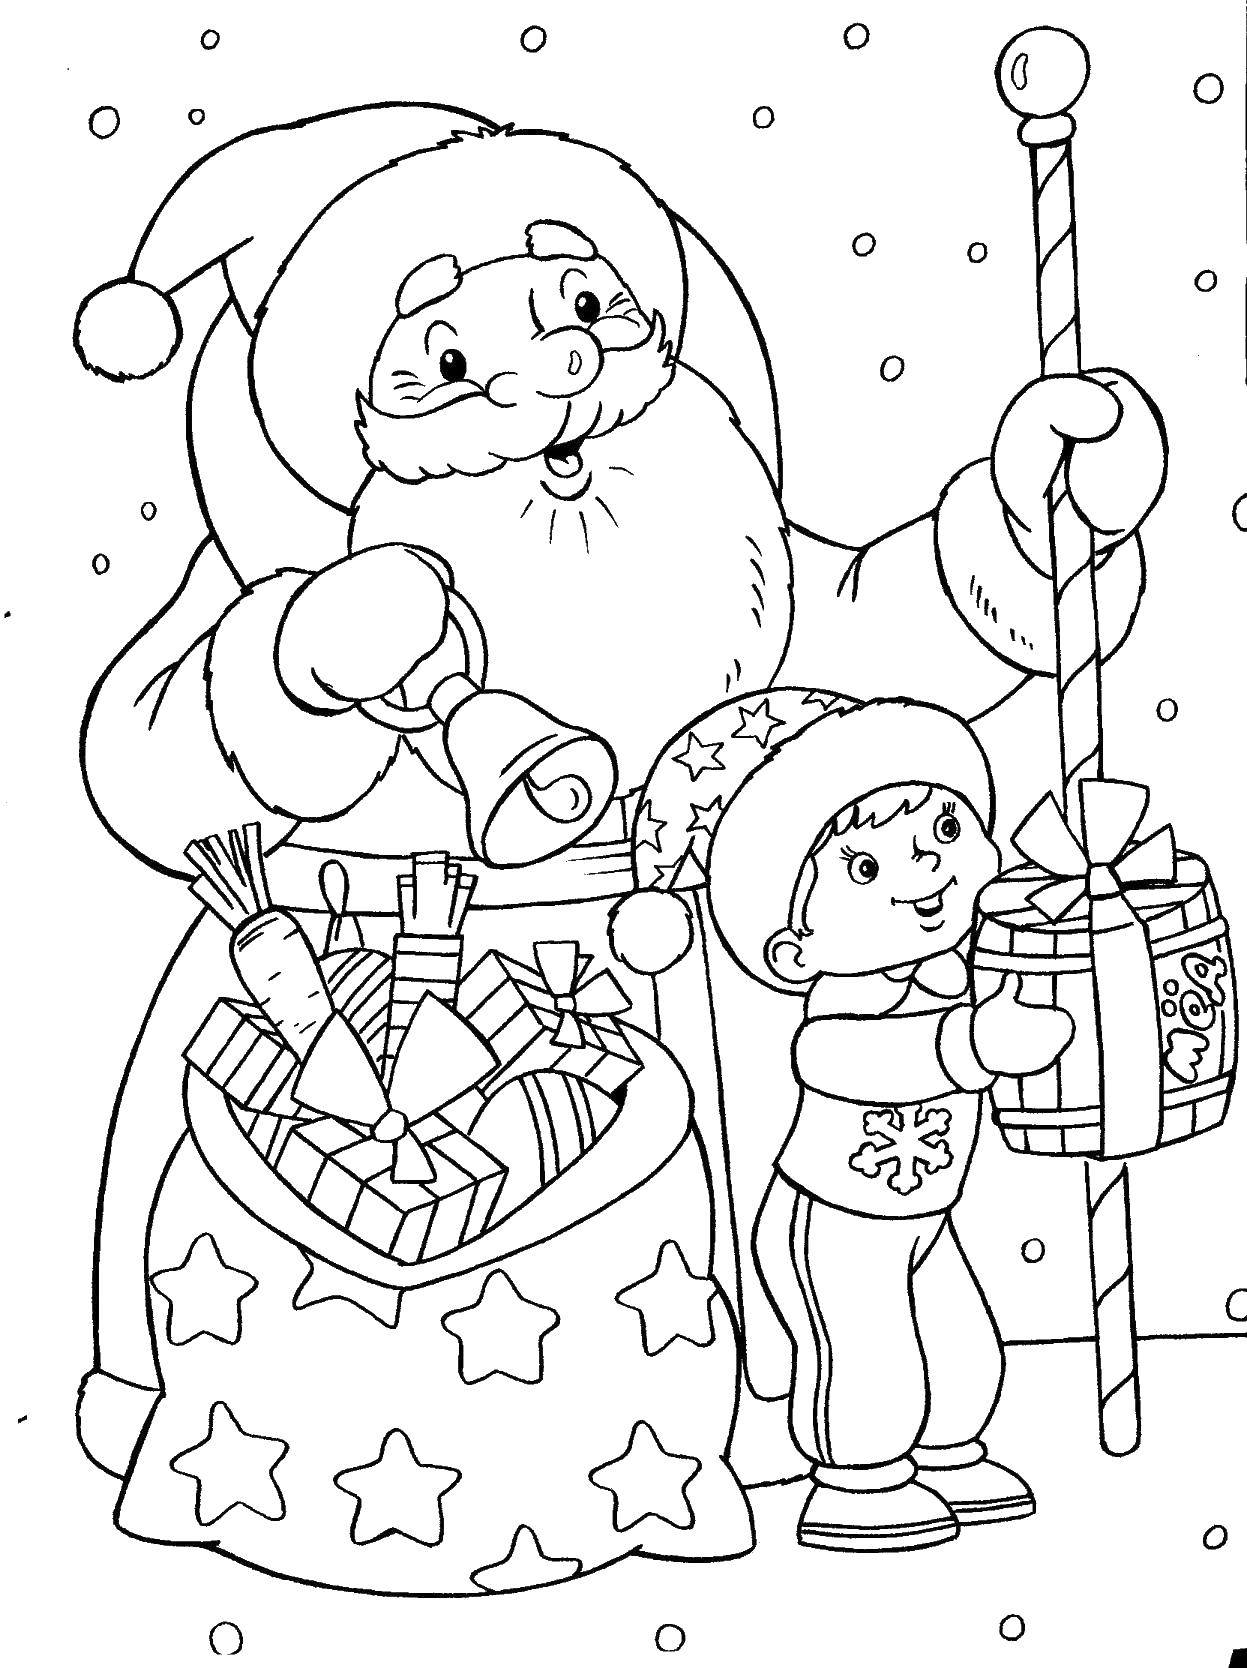 Coloring Santa Claus with boy gifts. Category Santa Claus. Tags:  Santa Claus, gifts.